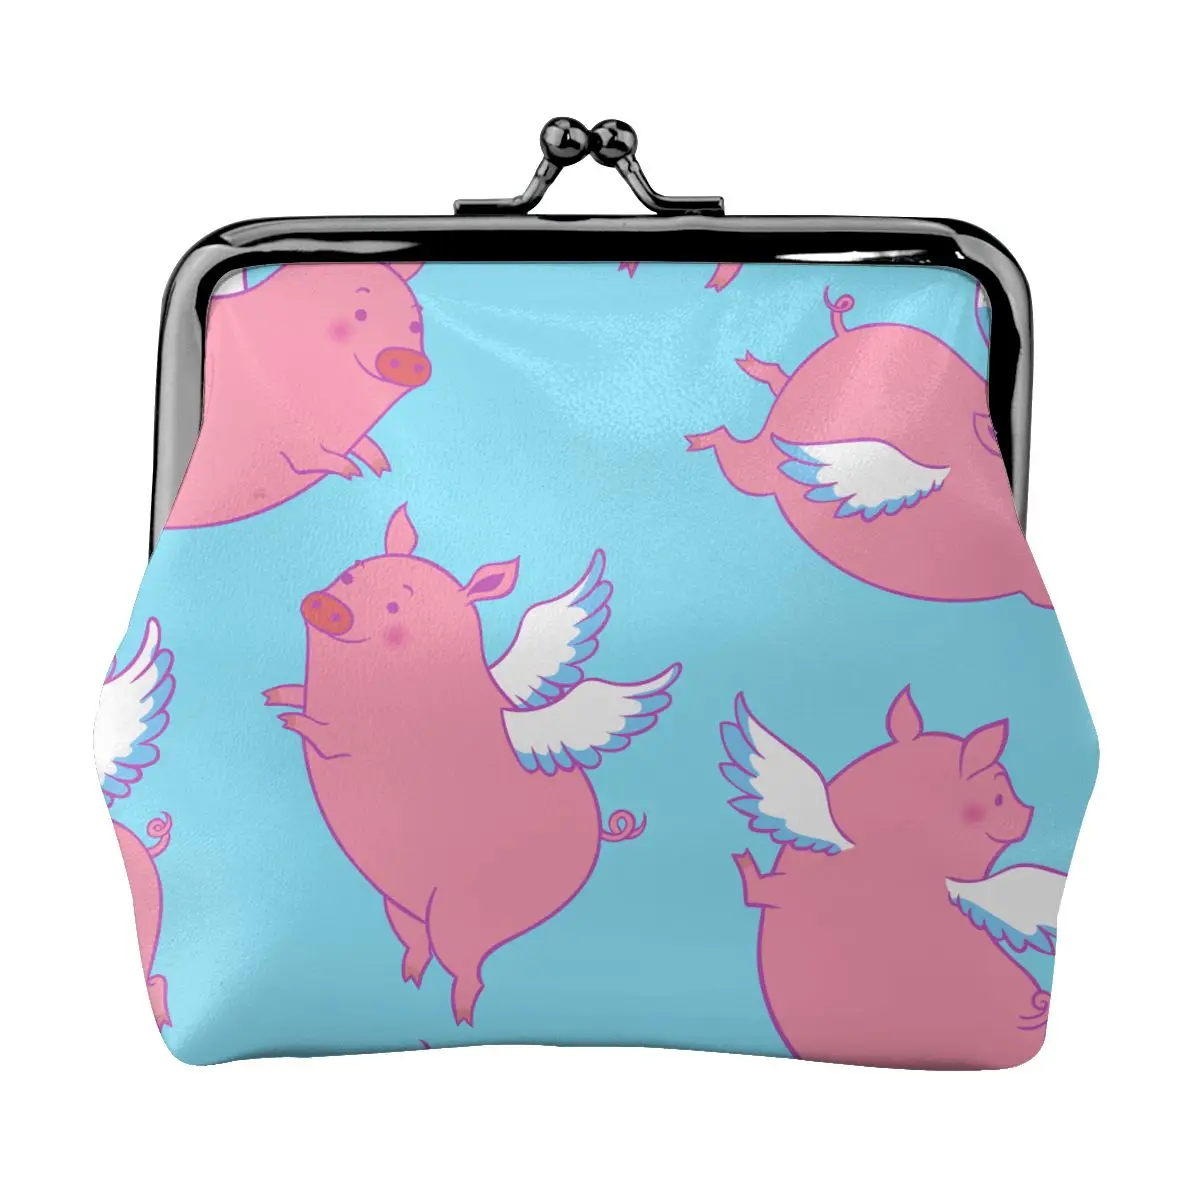 

Small Wallet Women Mini Printing Coin Purses Hasp Cash Card Handbags Clutch Money Change Bag Cute Flying Winged Piglets